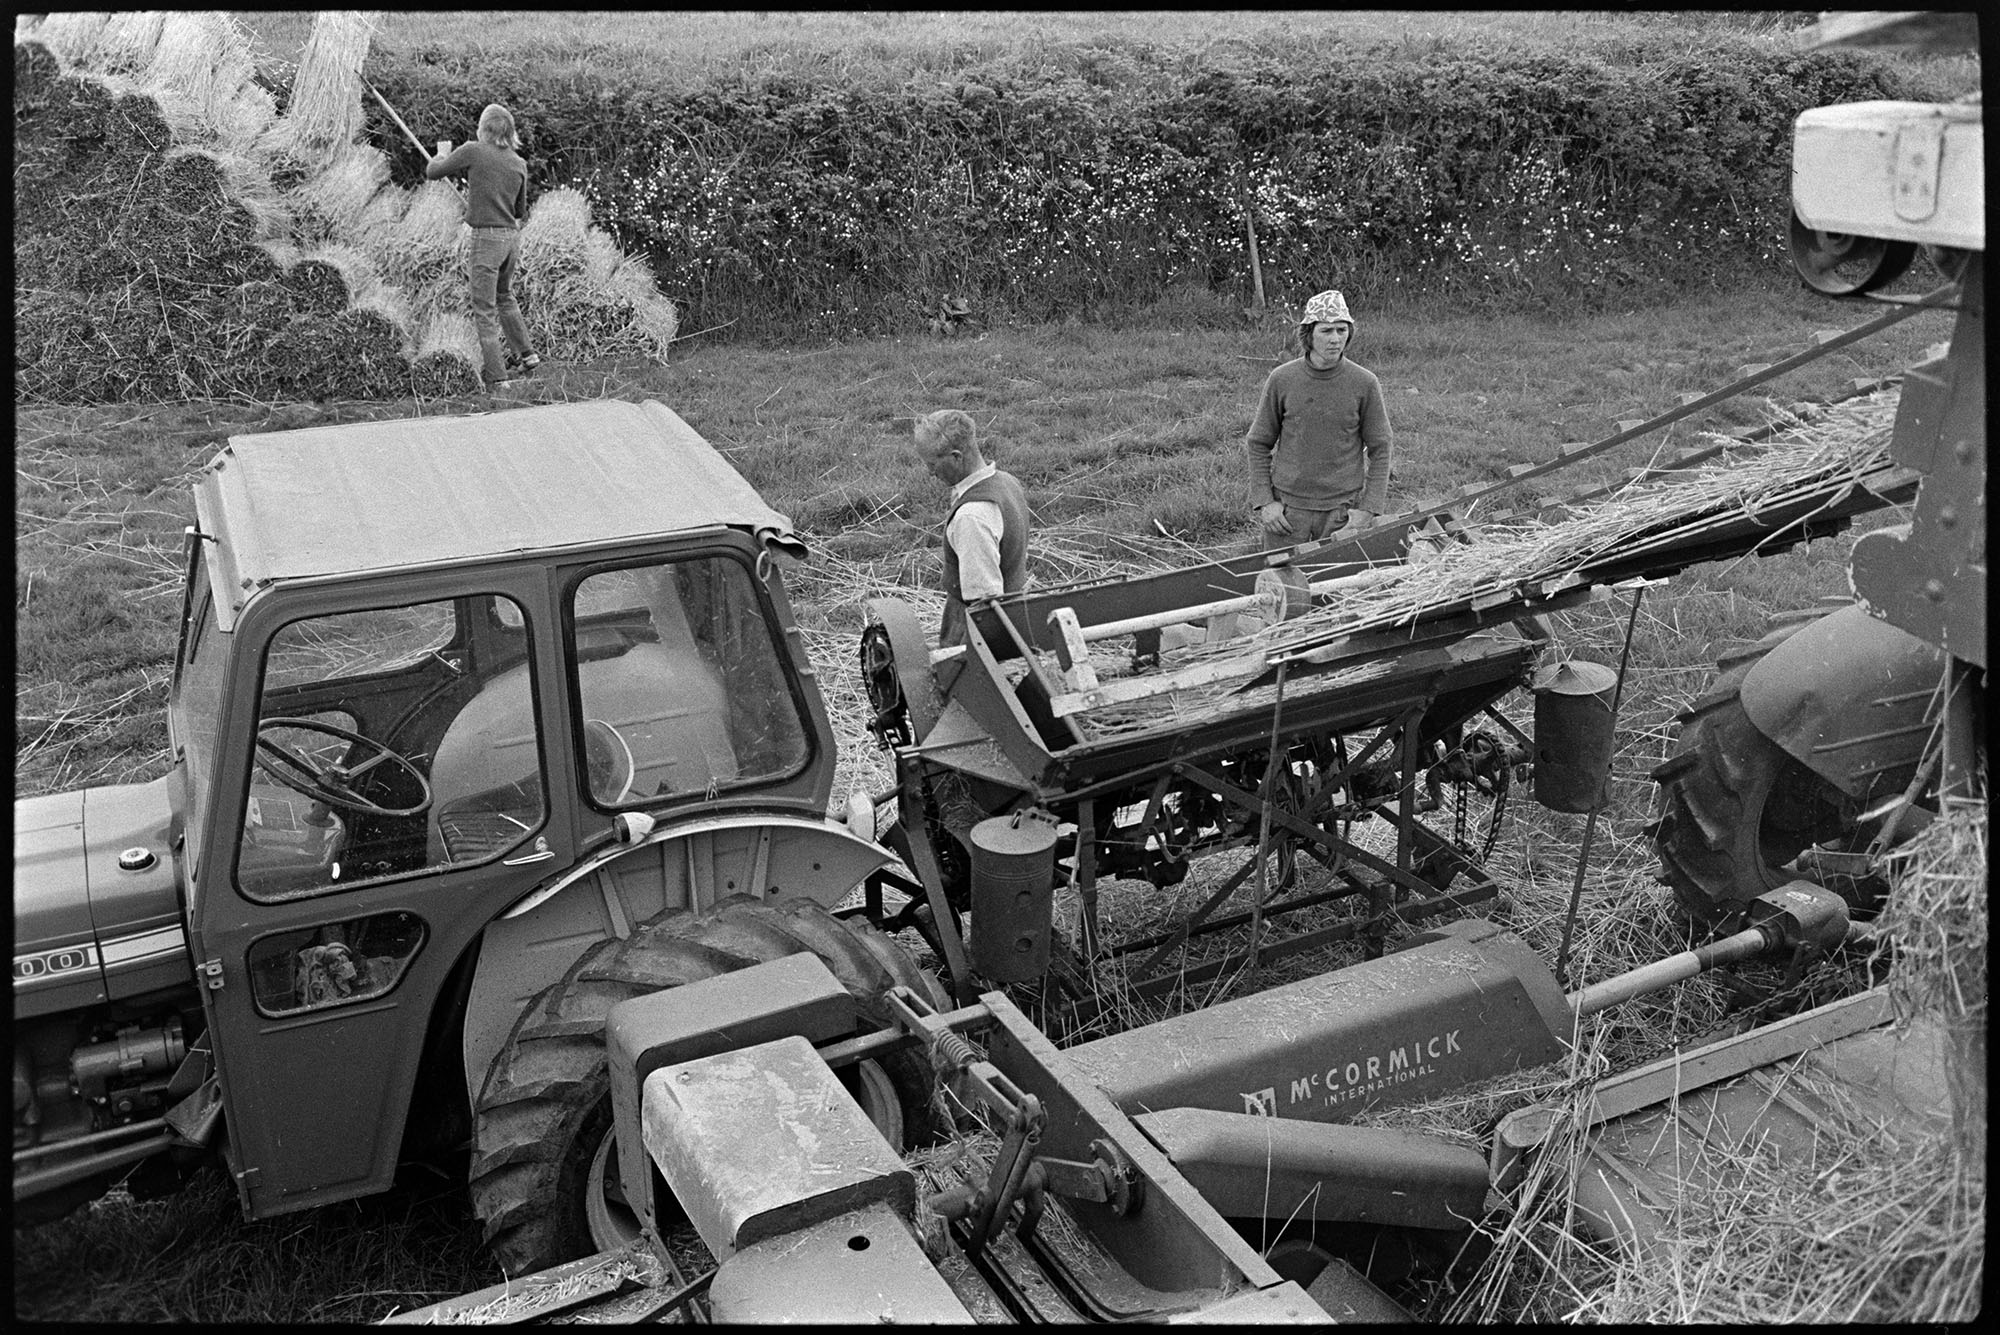 Reed combing, men working, ricks, tractors, etc. <br />
[A tractor and reed comber processing reed. Men are collecting the bundles of reed at the bottom of the comber and in the background a pile of reed bundles can be seen. A person is adding another bundle of reed to the pile.]